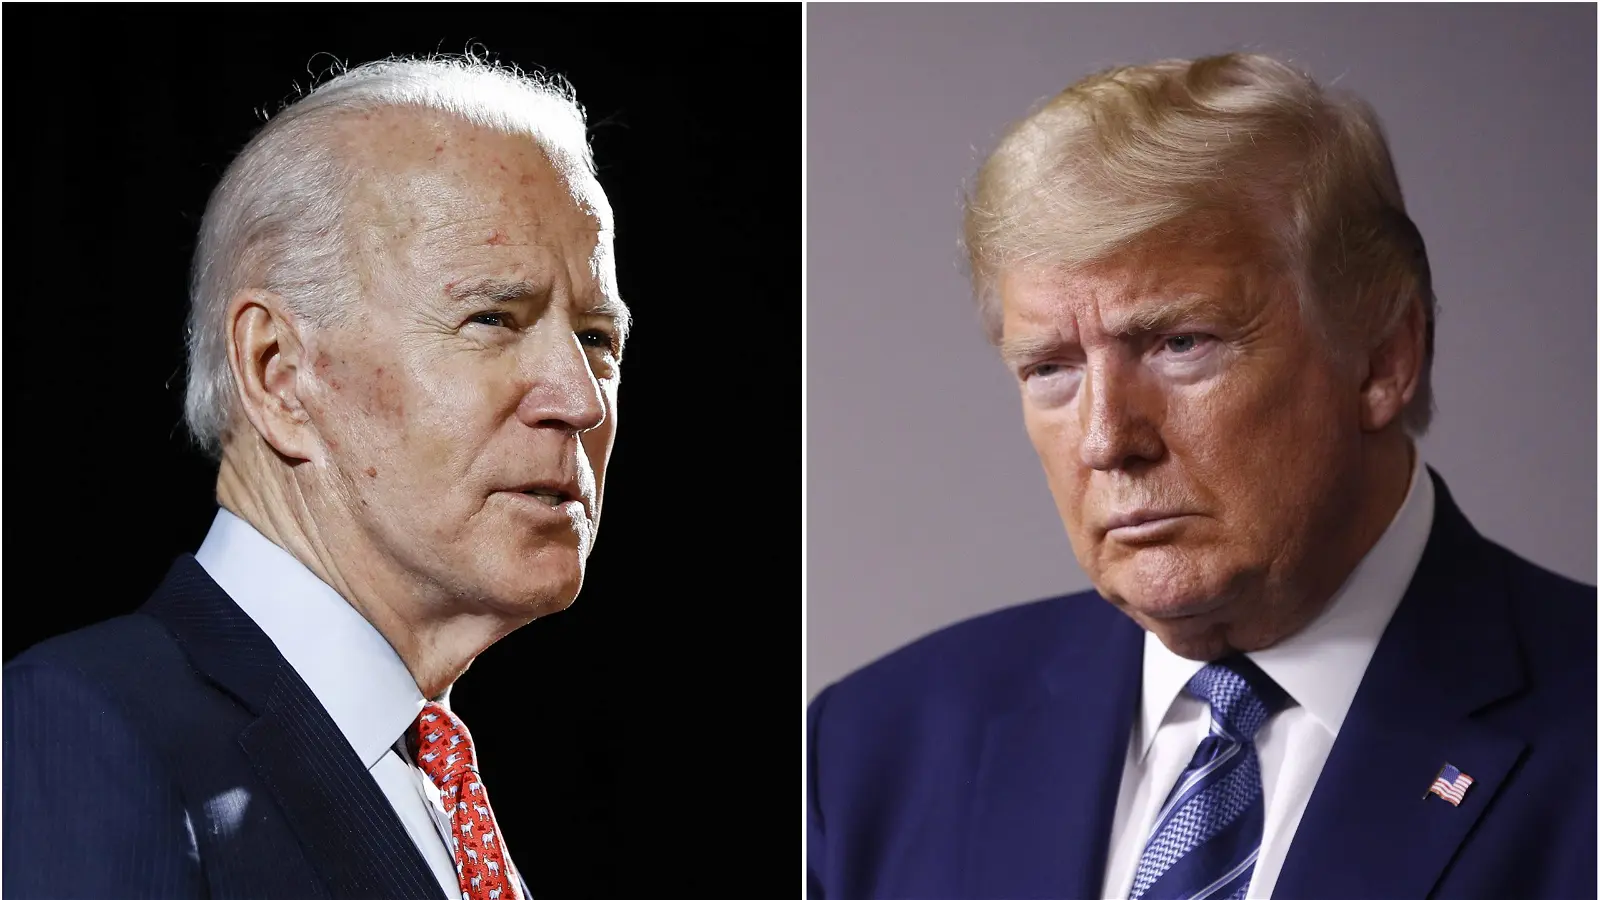 Biden Faces Crucial Moment in High-Stakes State of the Union Speech